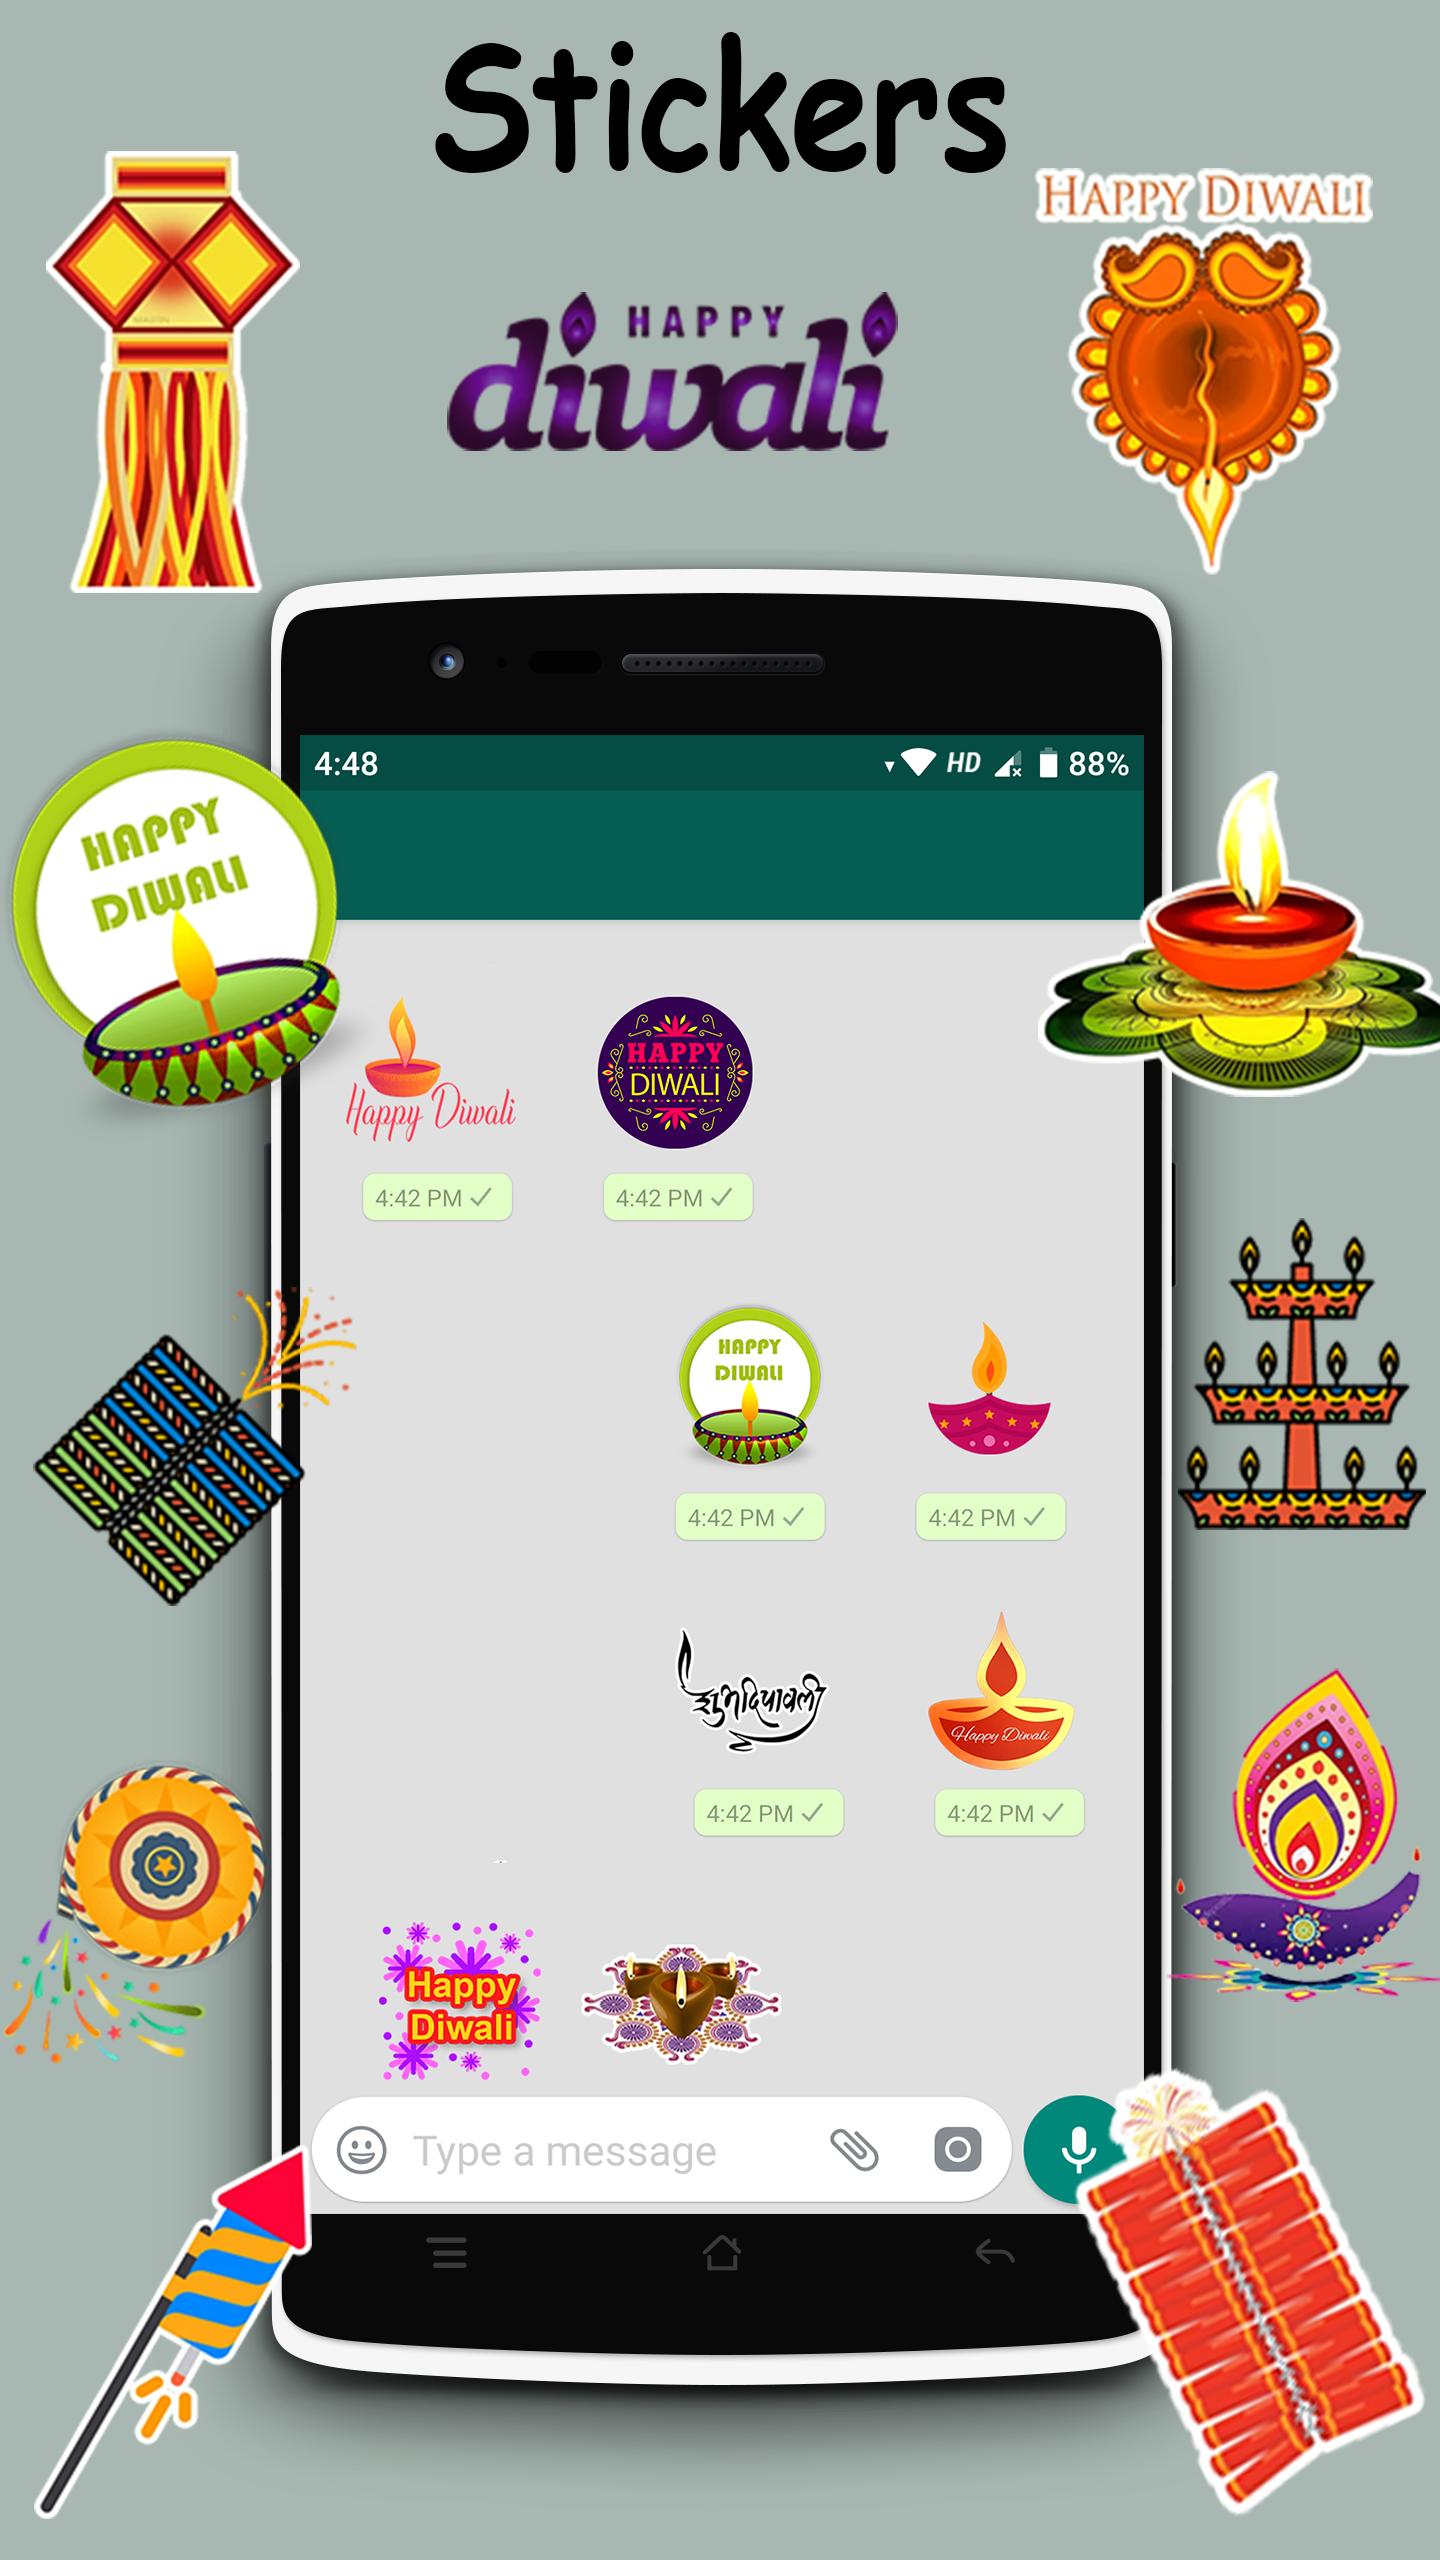 Wa Sticker Sticker For Whatsapp Online 2020 For Android Apk